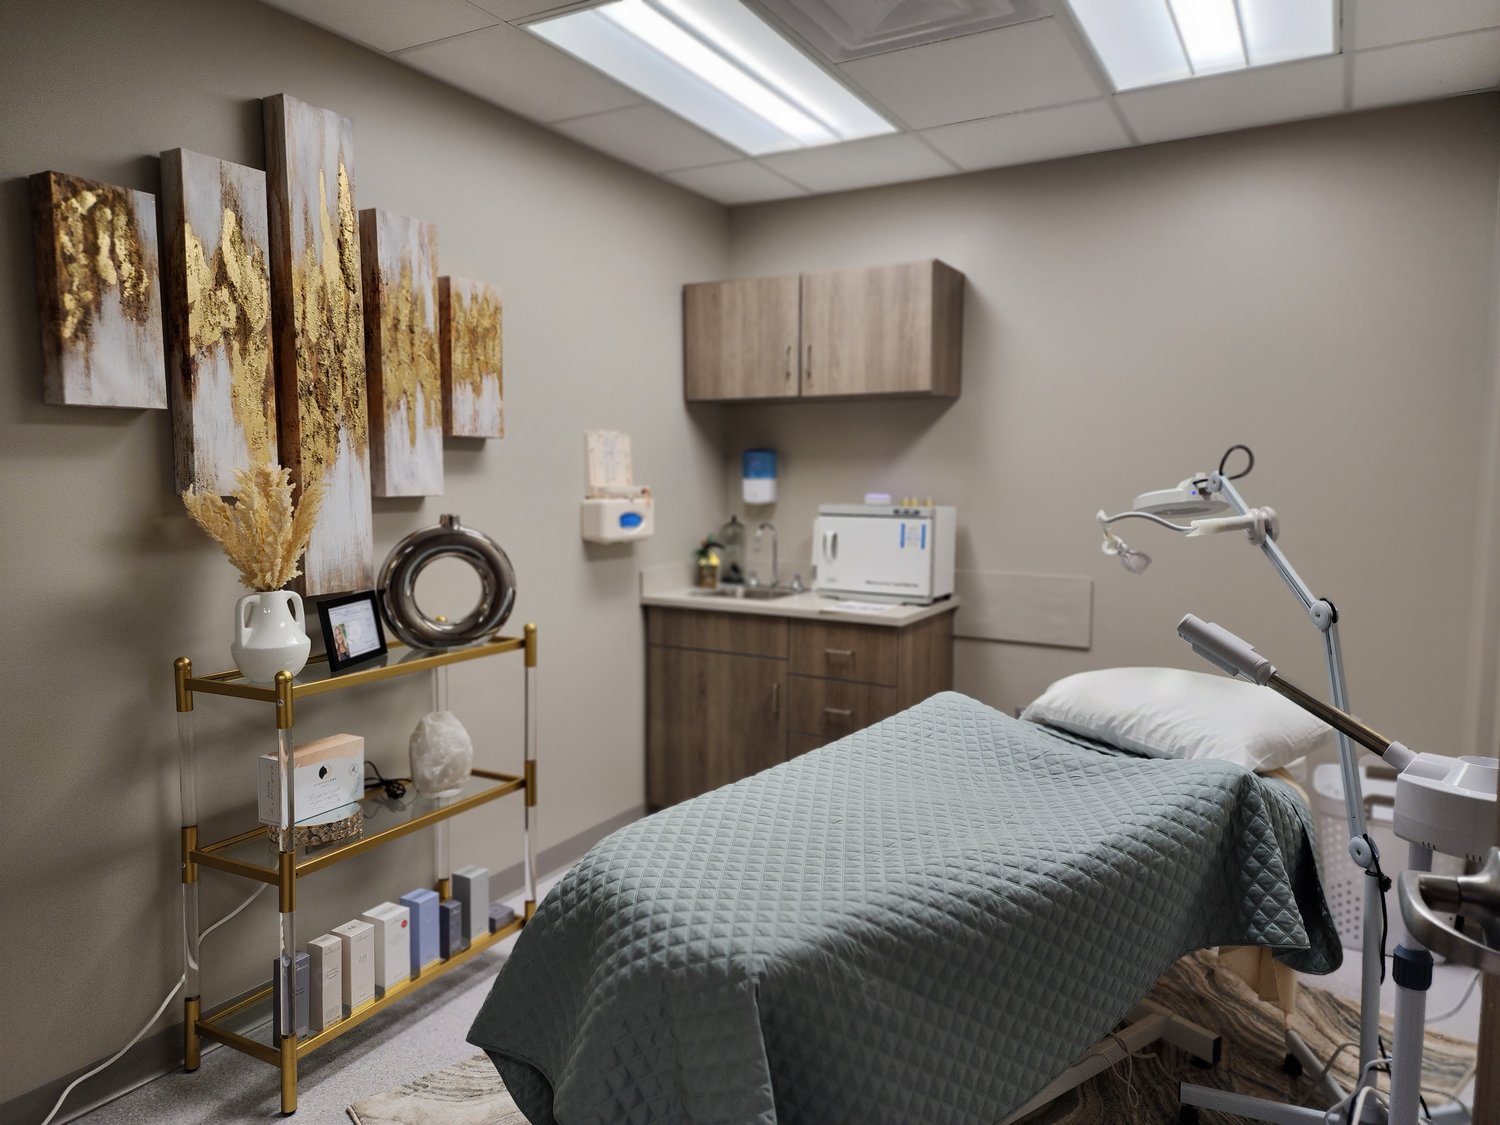 A room at the new Elite Medical Spa &amp; Wellness Institute in the 117 Business Park building is shown. The full-service medical spa and infusion center will operate from 8 a.m. to 5 p.m. Monday through Friday under the direction of Slocum-Dickson’s plastic surgeon Dr. Stephan Barrientos.